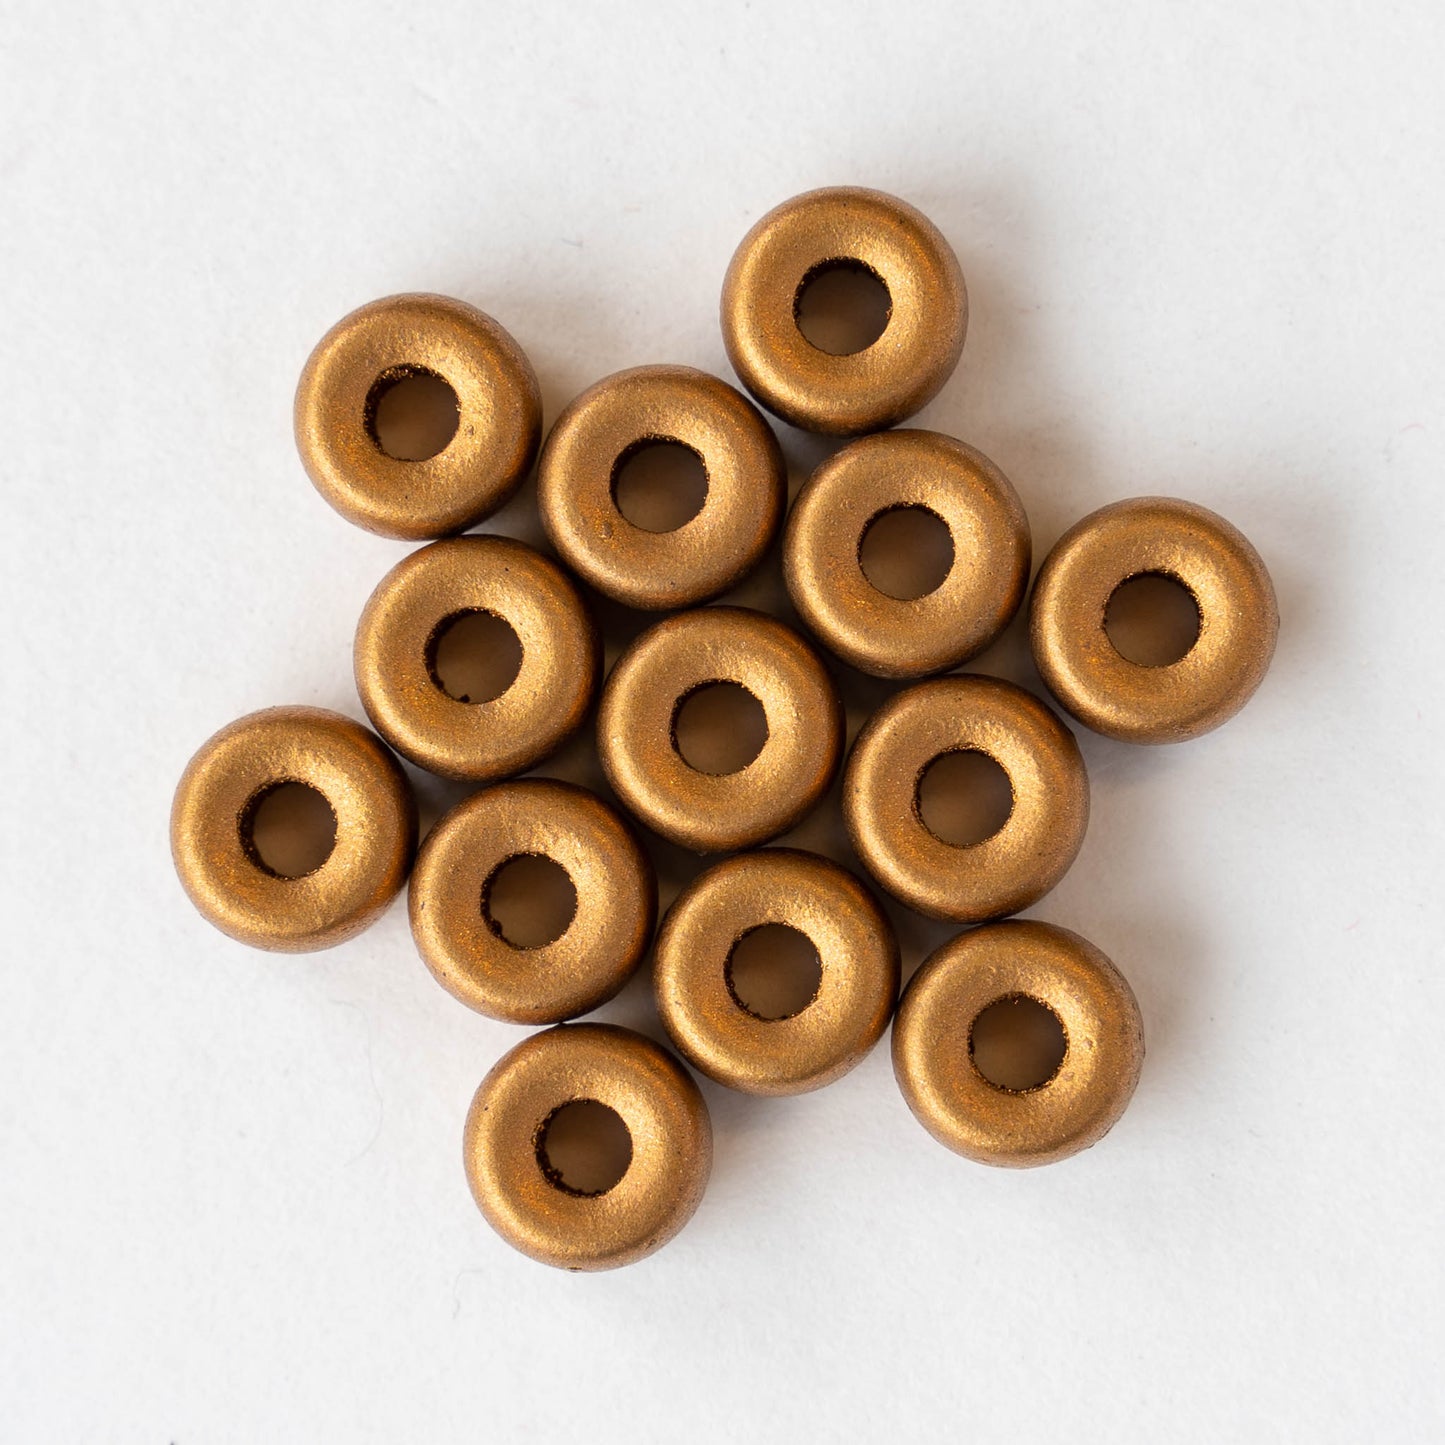 4x6mm Glass Tube Beads - Gold Matte - 30 or 90